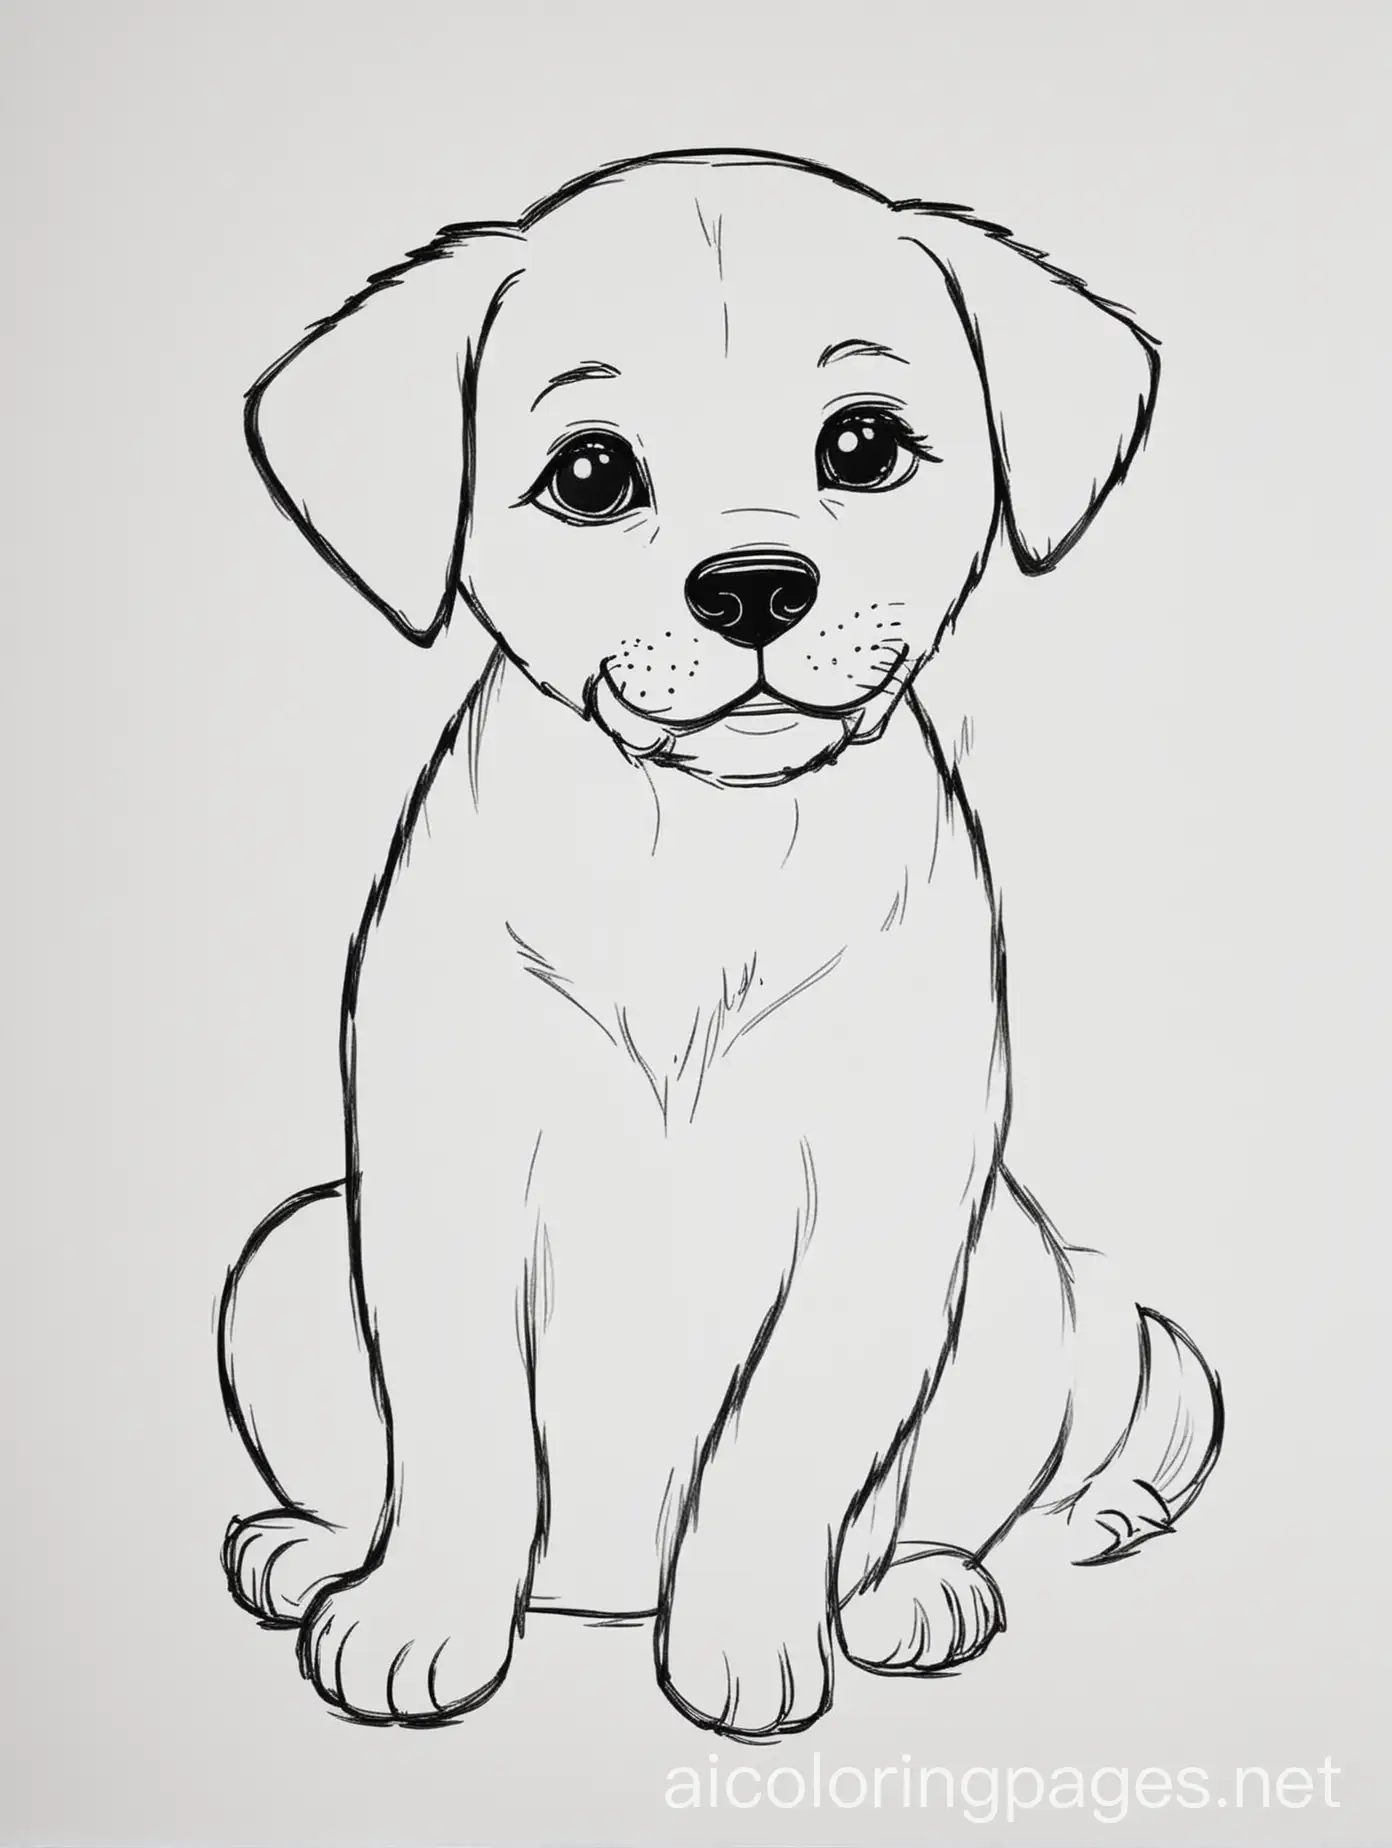 puppy, Extremely simple, basic shapes, coloring book for small children, isolated, simple, kids Coloring Page, black and white, line art, white background, Ample White Space, thick outlines, the outlines of all the subjects are easy to distinguish, making it simple for small children to color without too much difficulty. For three year olds, Coloring Page, black and white, line art, white background, Simplicity, Ample White Space. The background of the coloring page is plain white to make it easy for young children to color within the lines. The outlines of all the subjects are easy to distinguish, making it simple for kids to color without too much difficulty